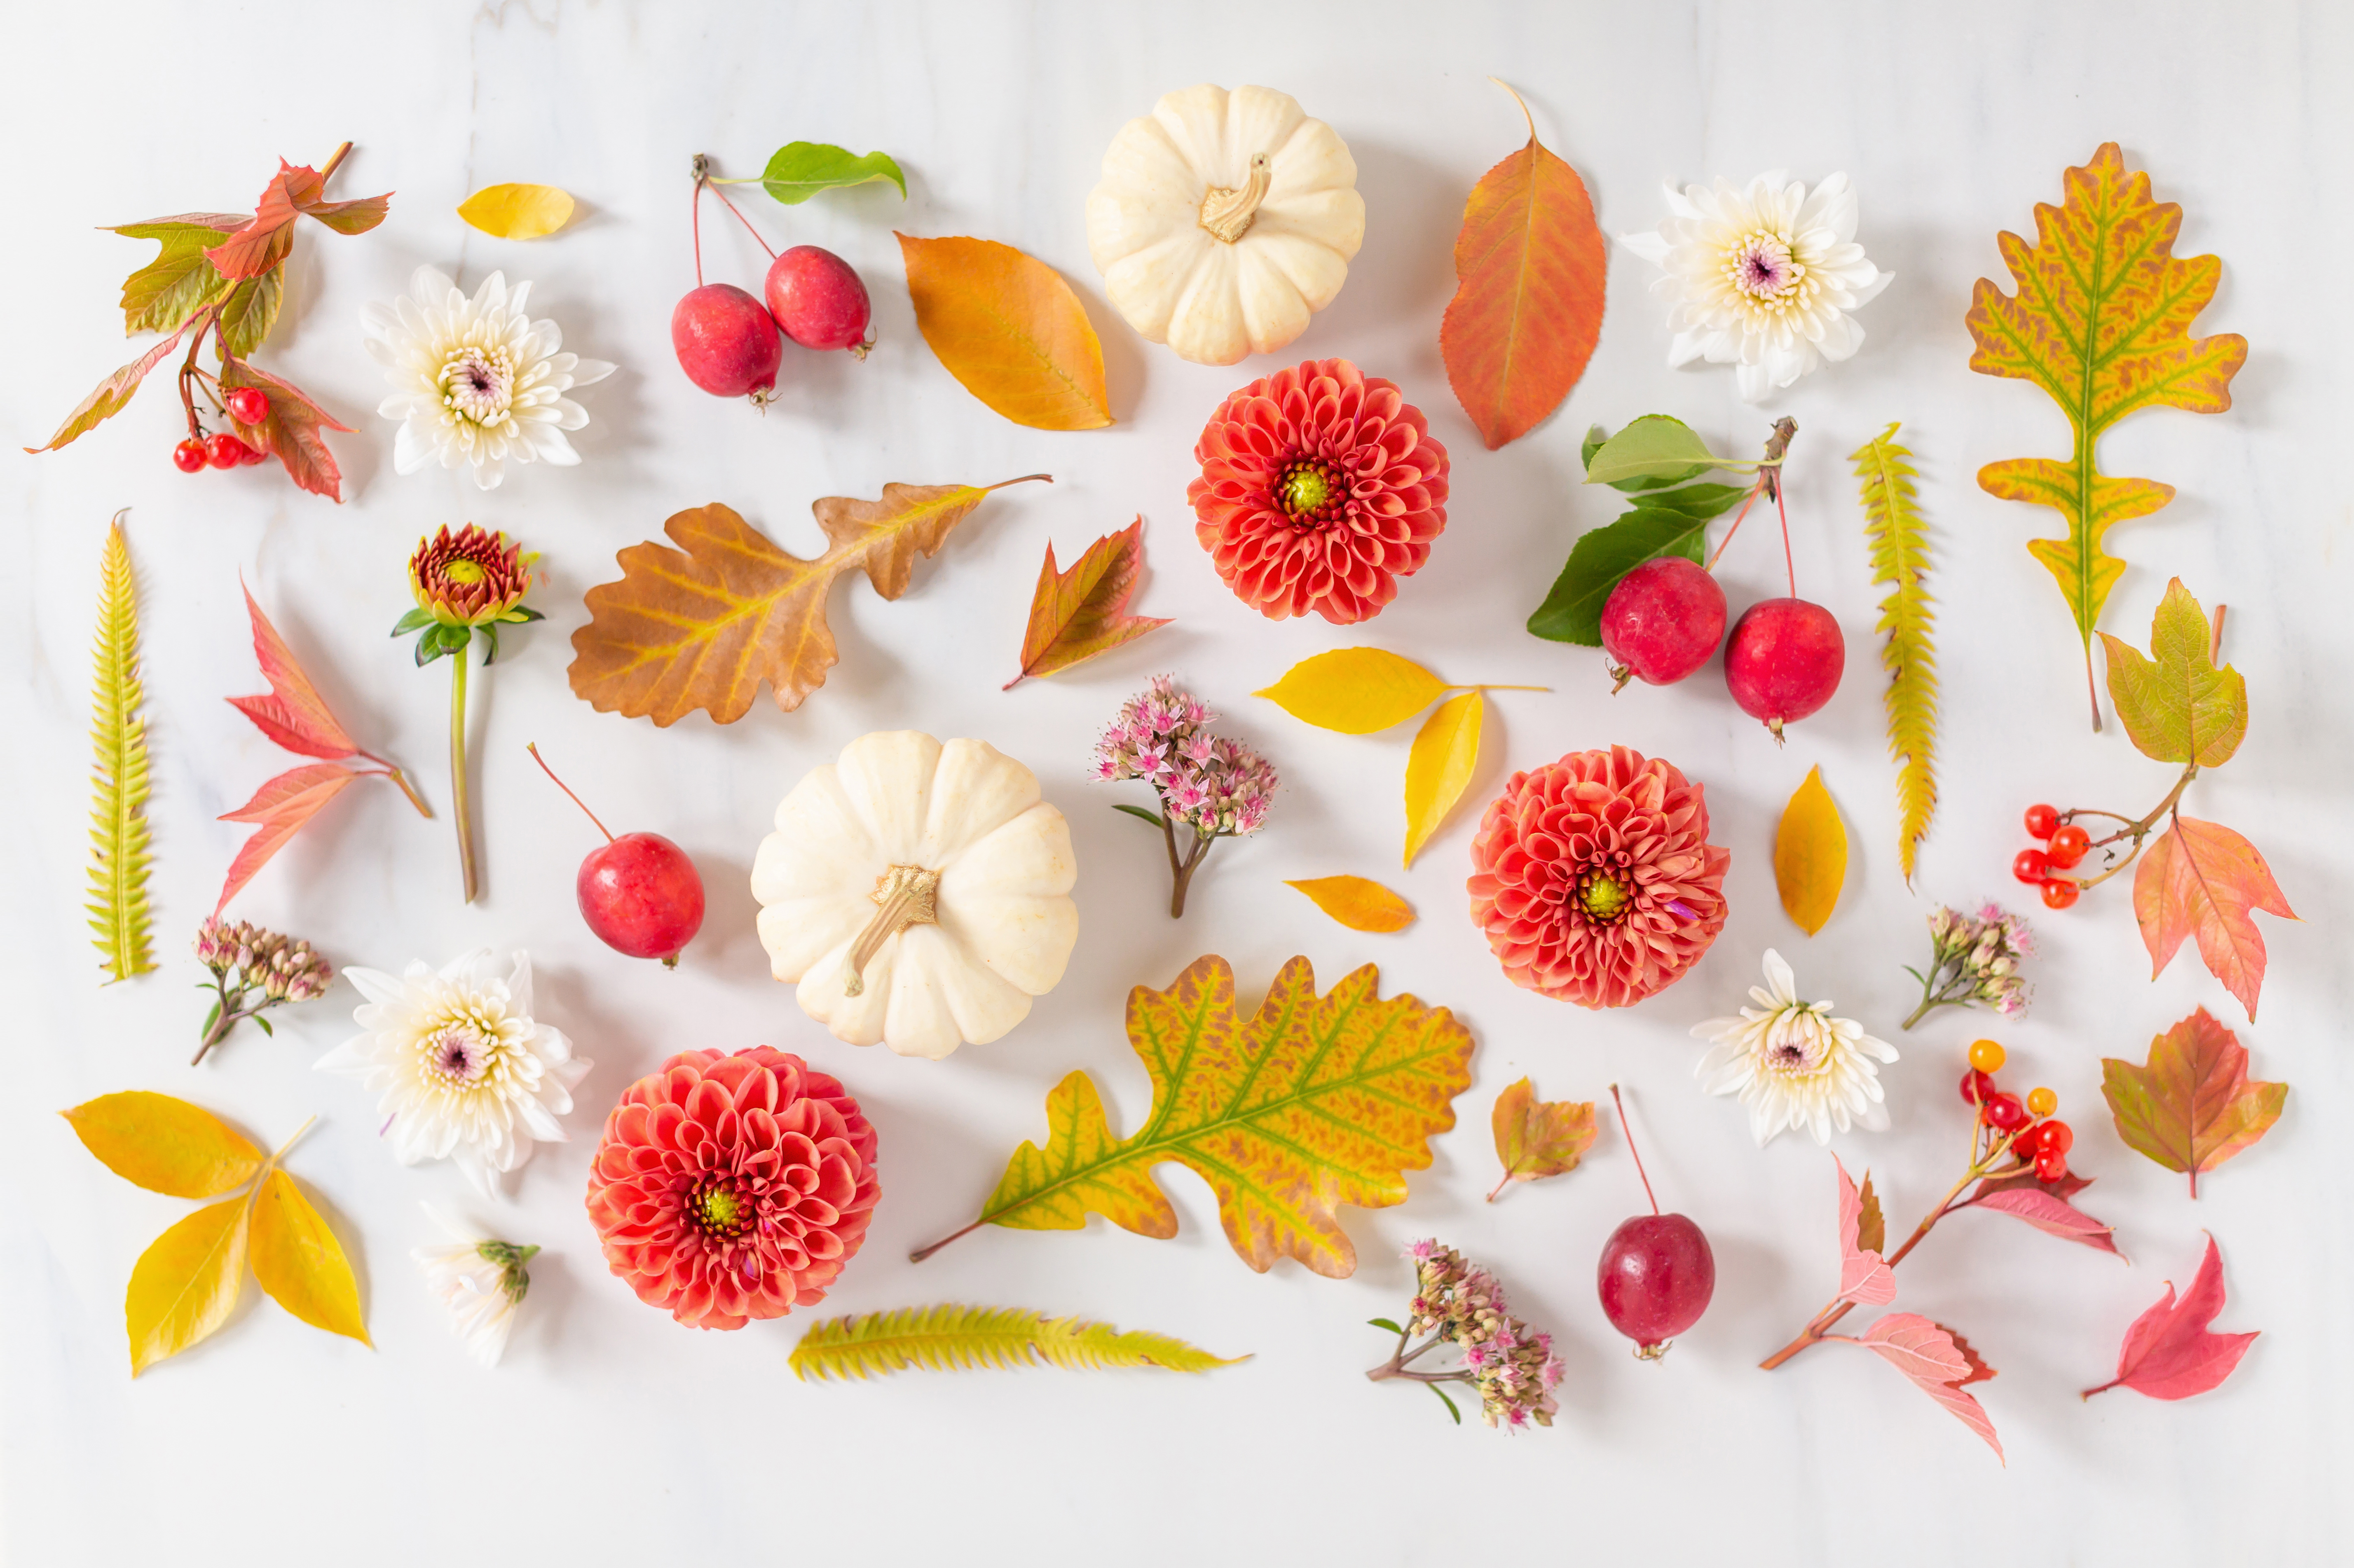 Digital Blooms October 2018 | Free Desktop Wallpapers for Fall with Dahlias, Sedum, Chrysanthemum Poms, Ornamental White Pumpkins, Crabapples and an array of foraged autumn leaves and berries | Pantone Fall / Winter 2018 Free Tech Wallpapers | Design 3 // JustineCelina.com x Rebecca Dawn Design